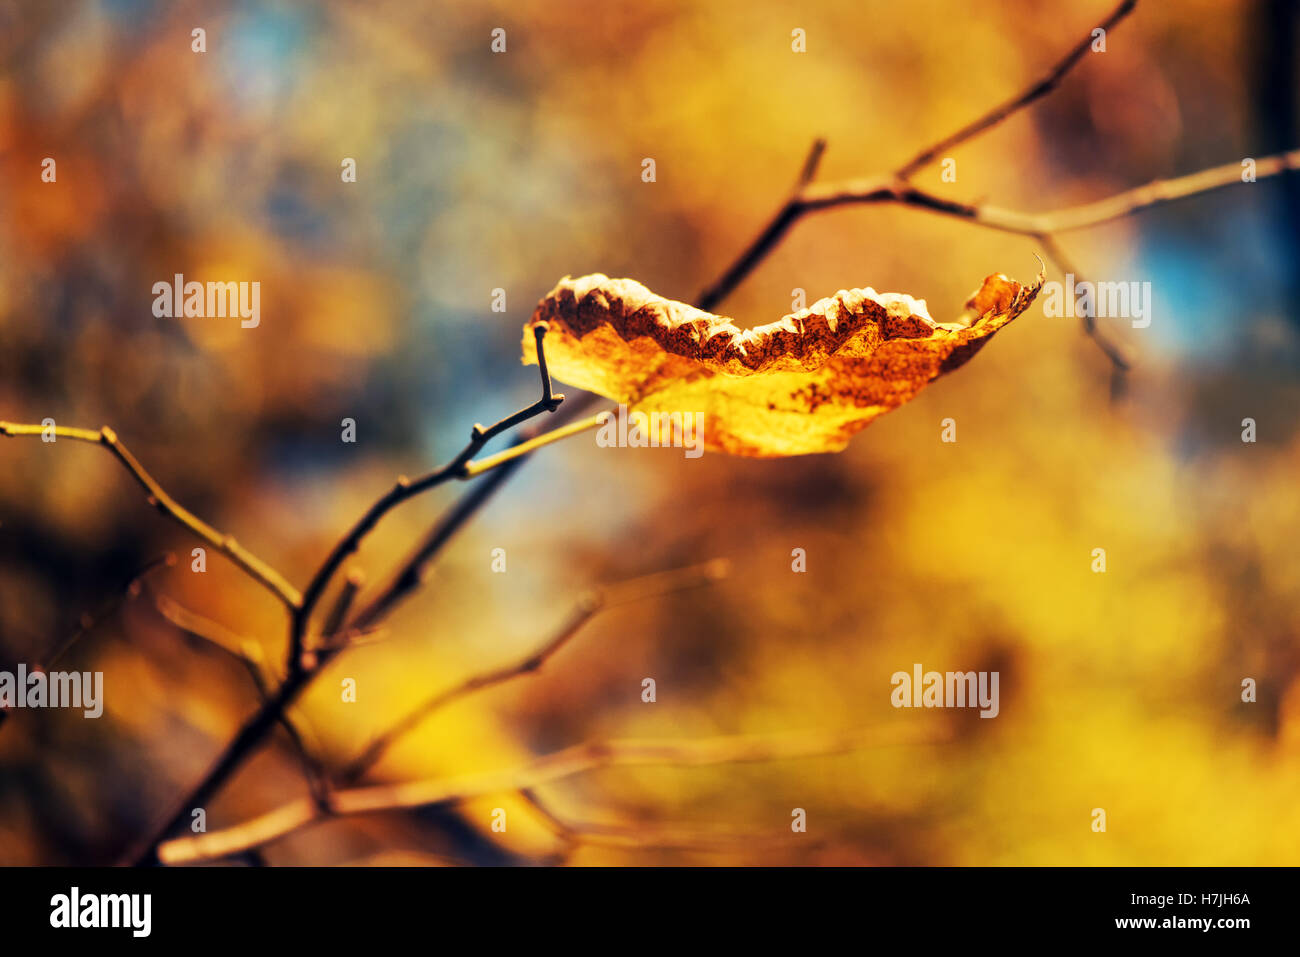 Dry leaf on the branch, fall season, vivid colors of autumn scenery, selective focus Stock Photo